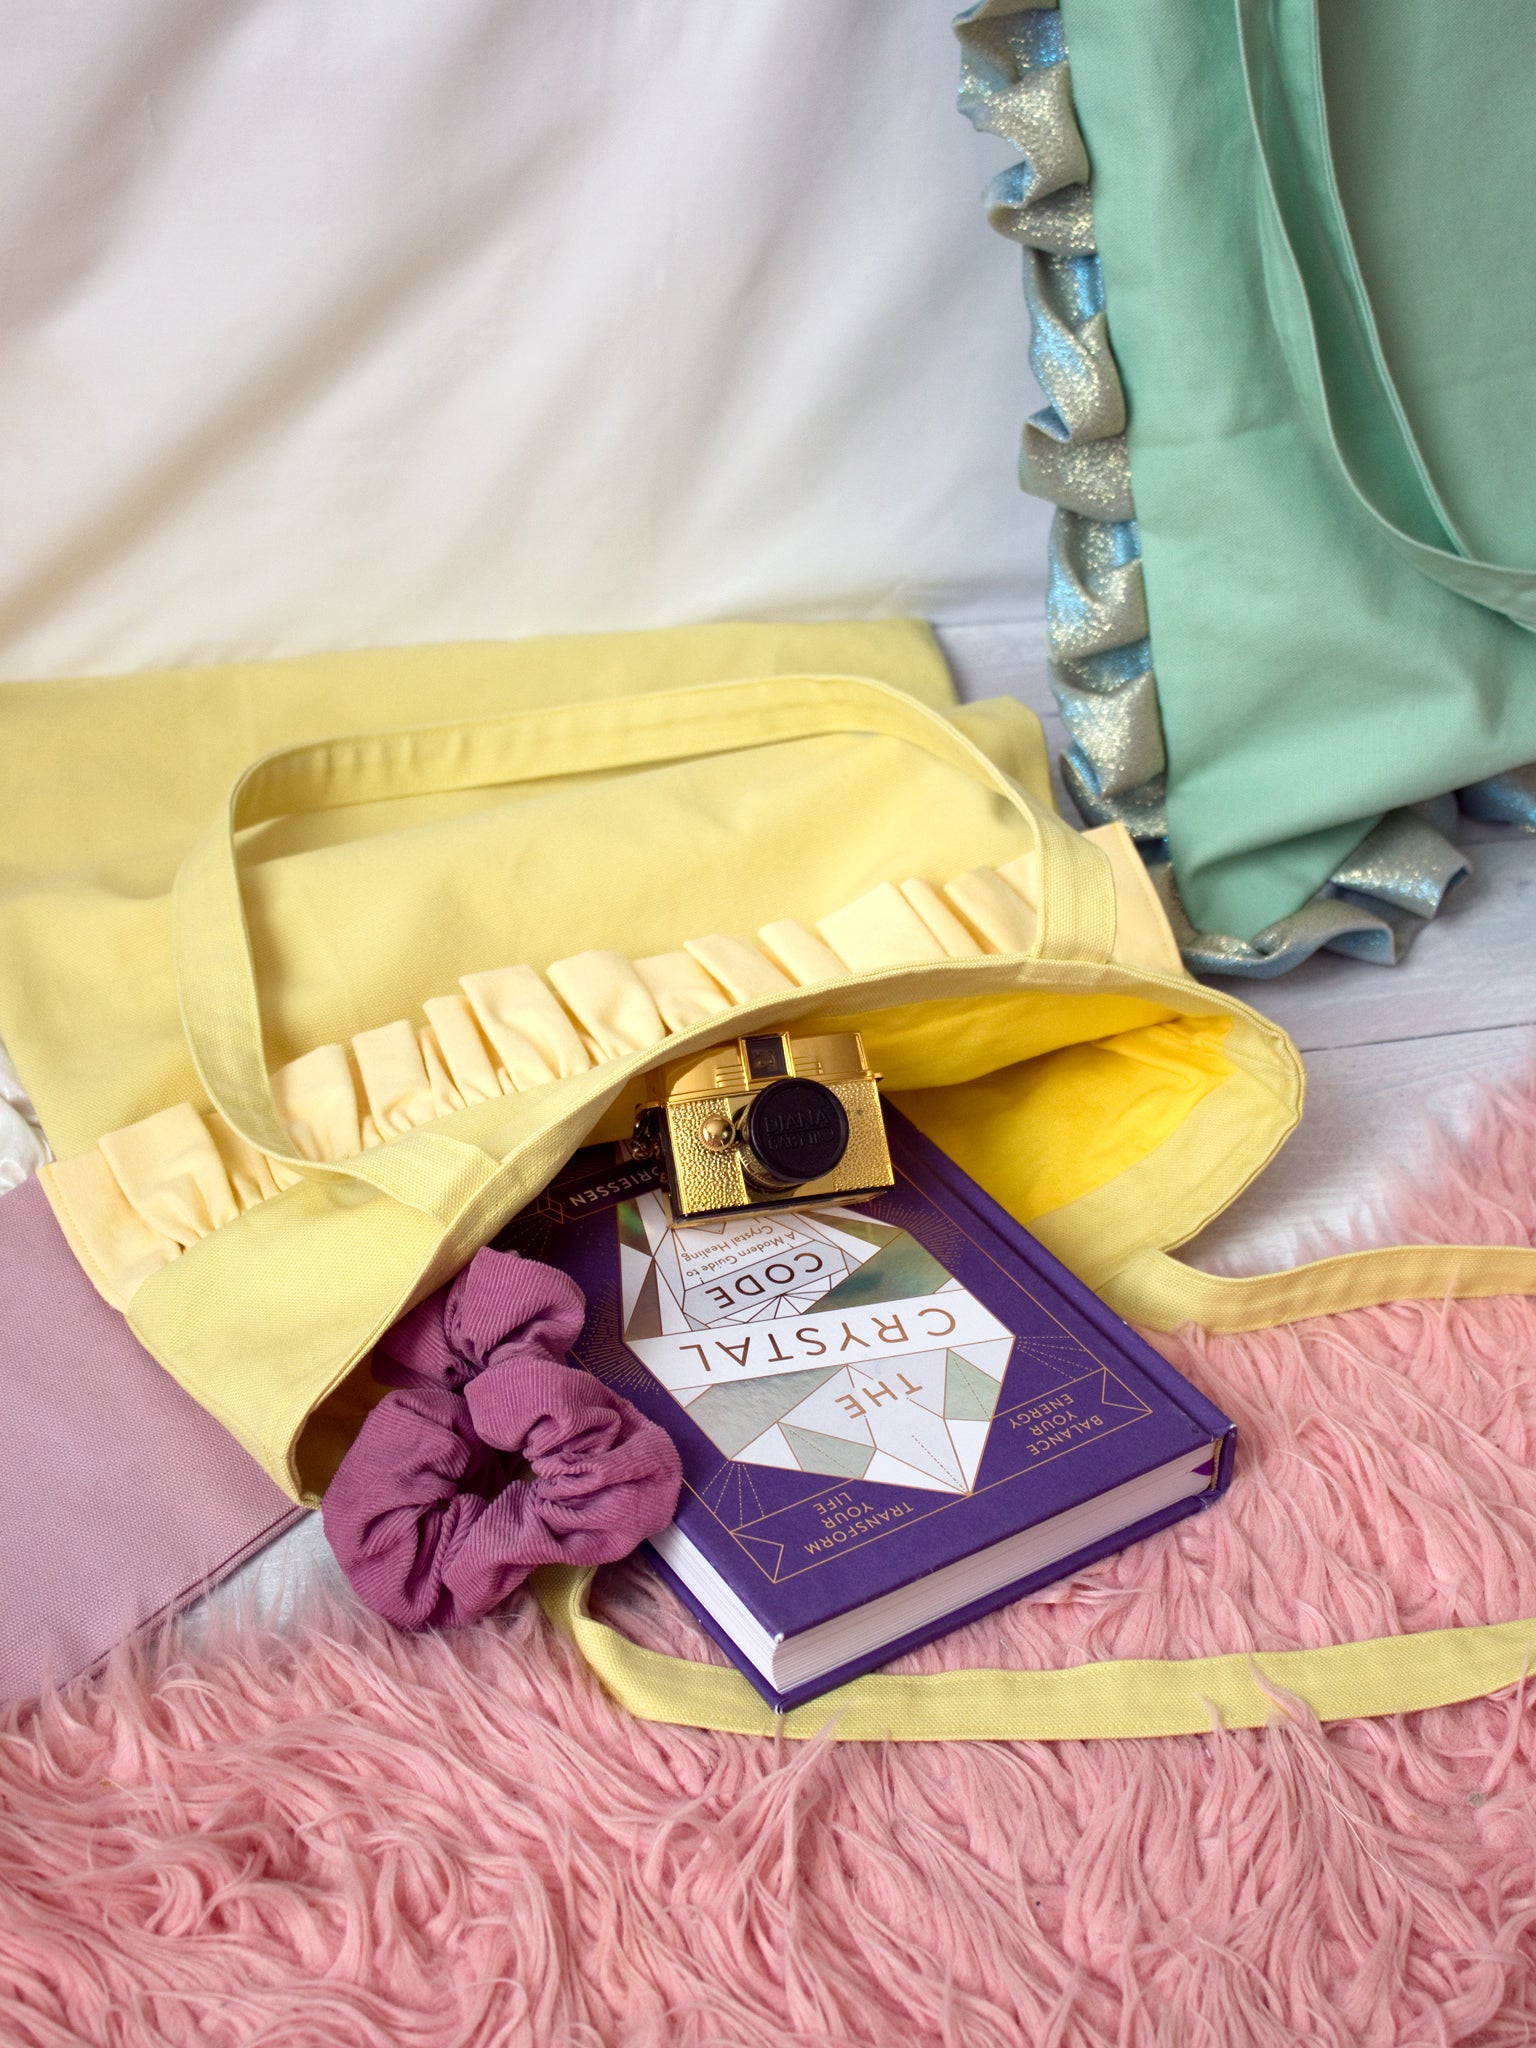 A yellow ruffle tote bag is open on the floor, showing the contents of a notepad, scrunchie and camera.